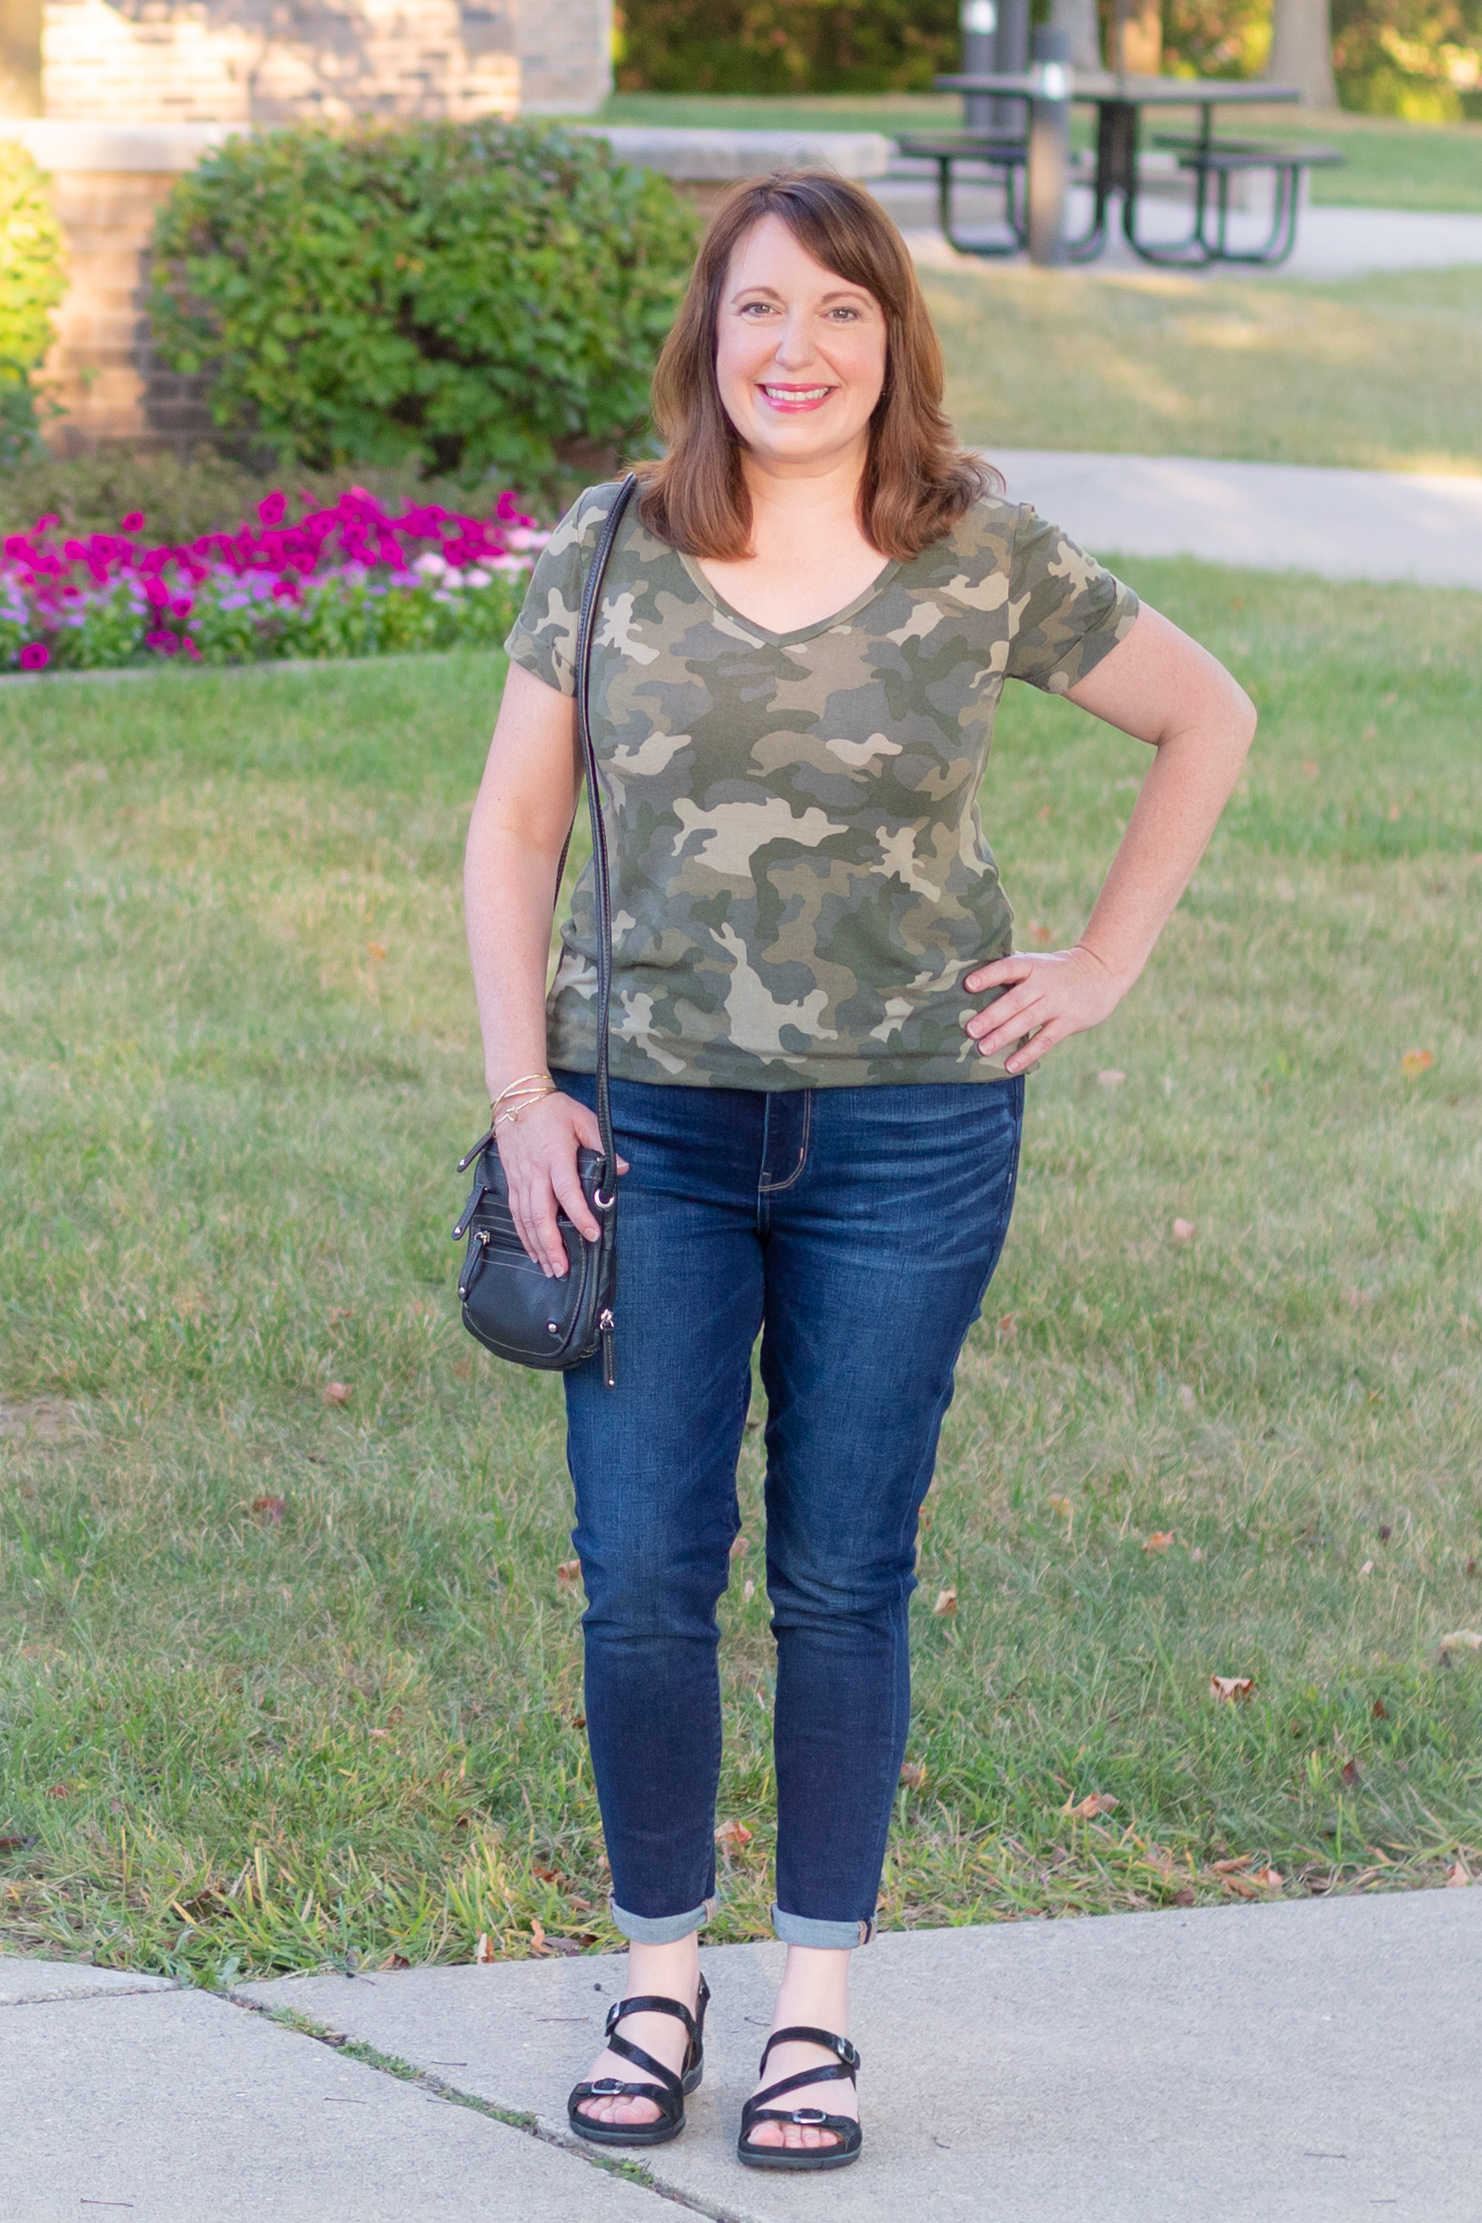 Dianna Wearing a Camo Tee and Jeans for Fall